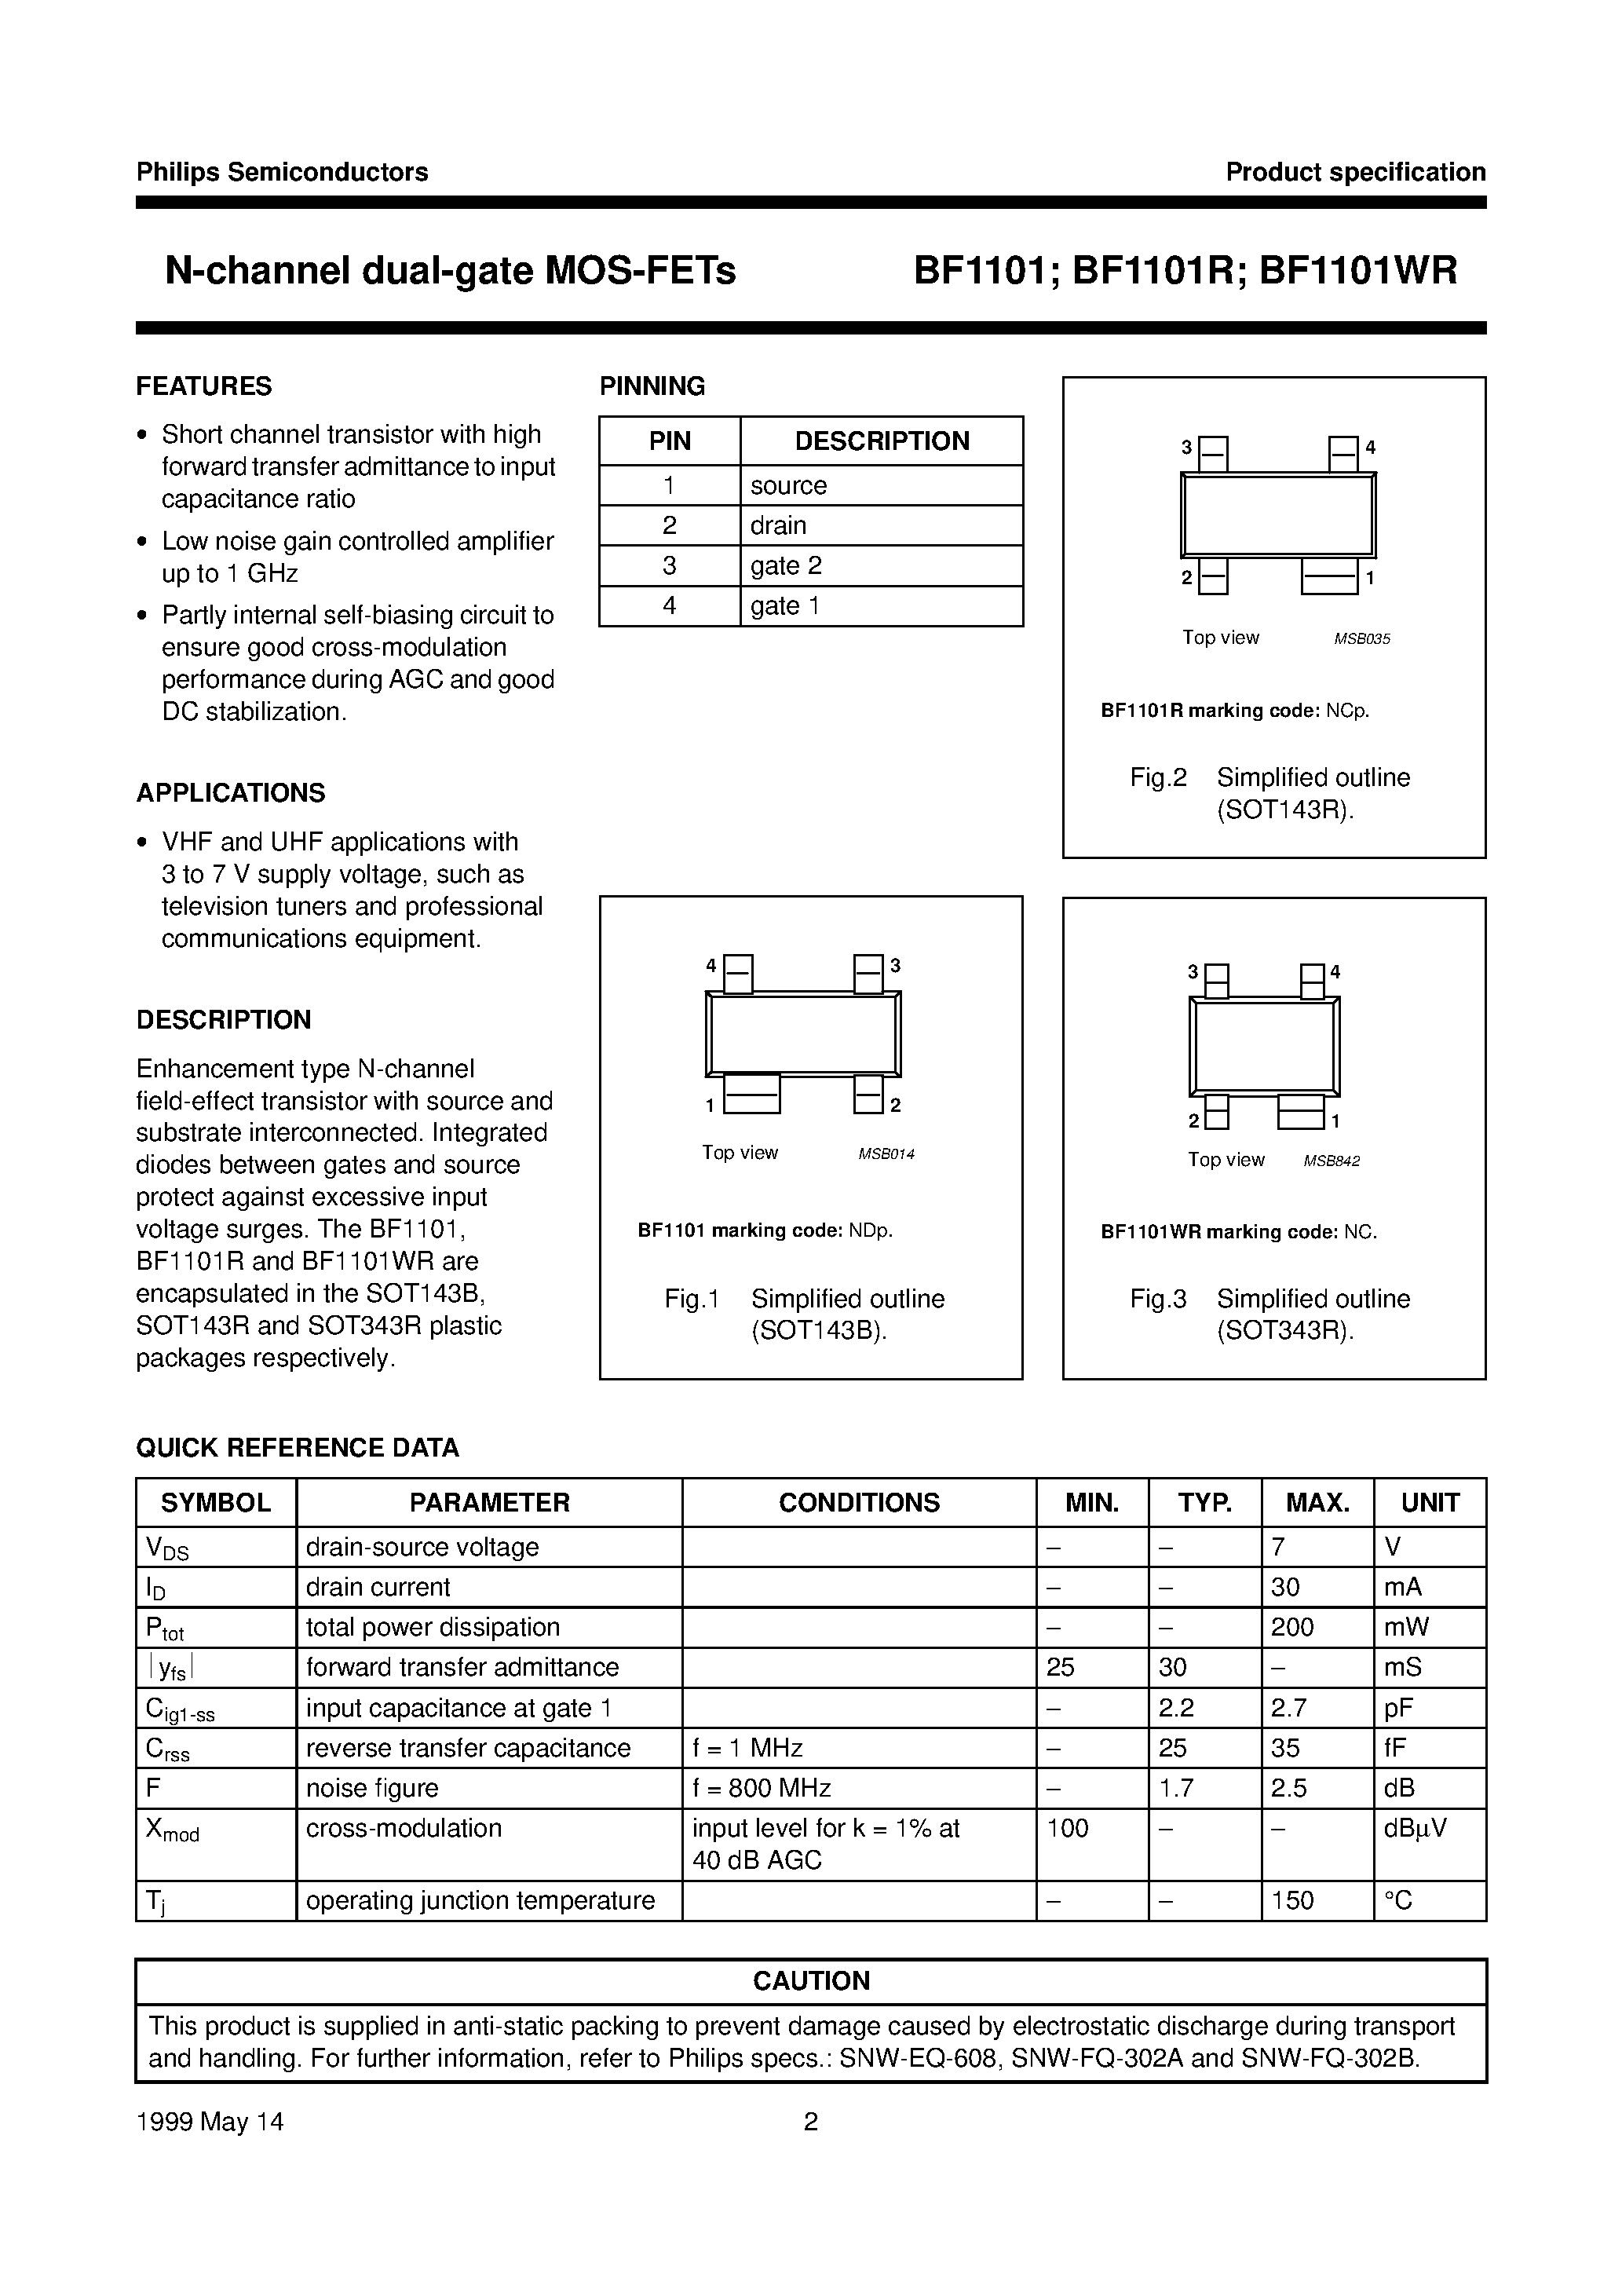 Datasheet BF1101WR - N-channel dual-gate MOS-FETs page 2